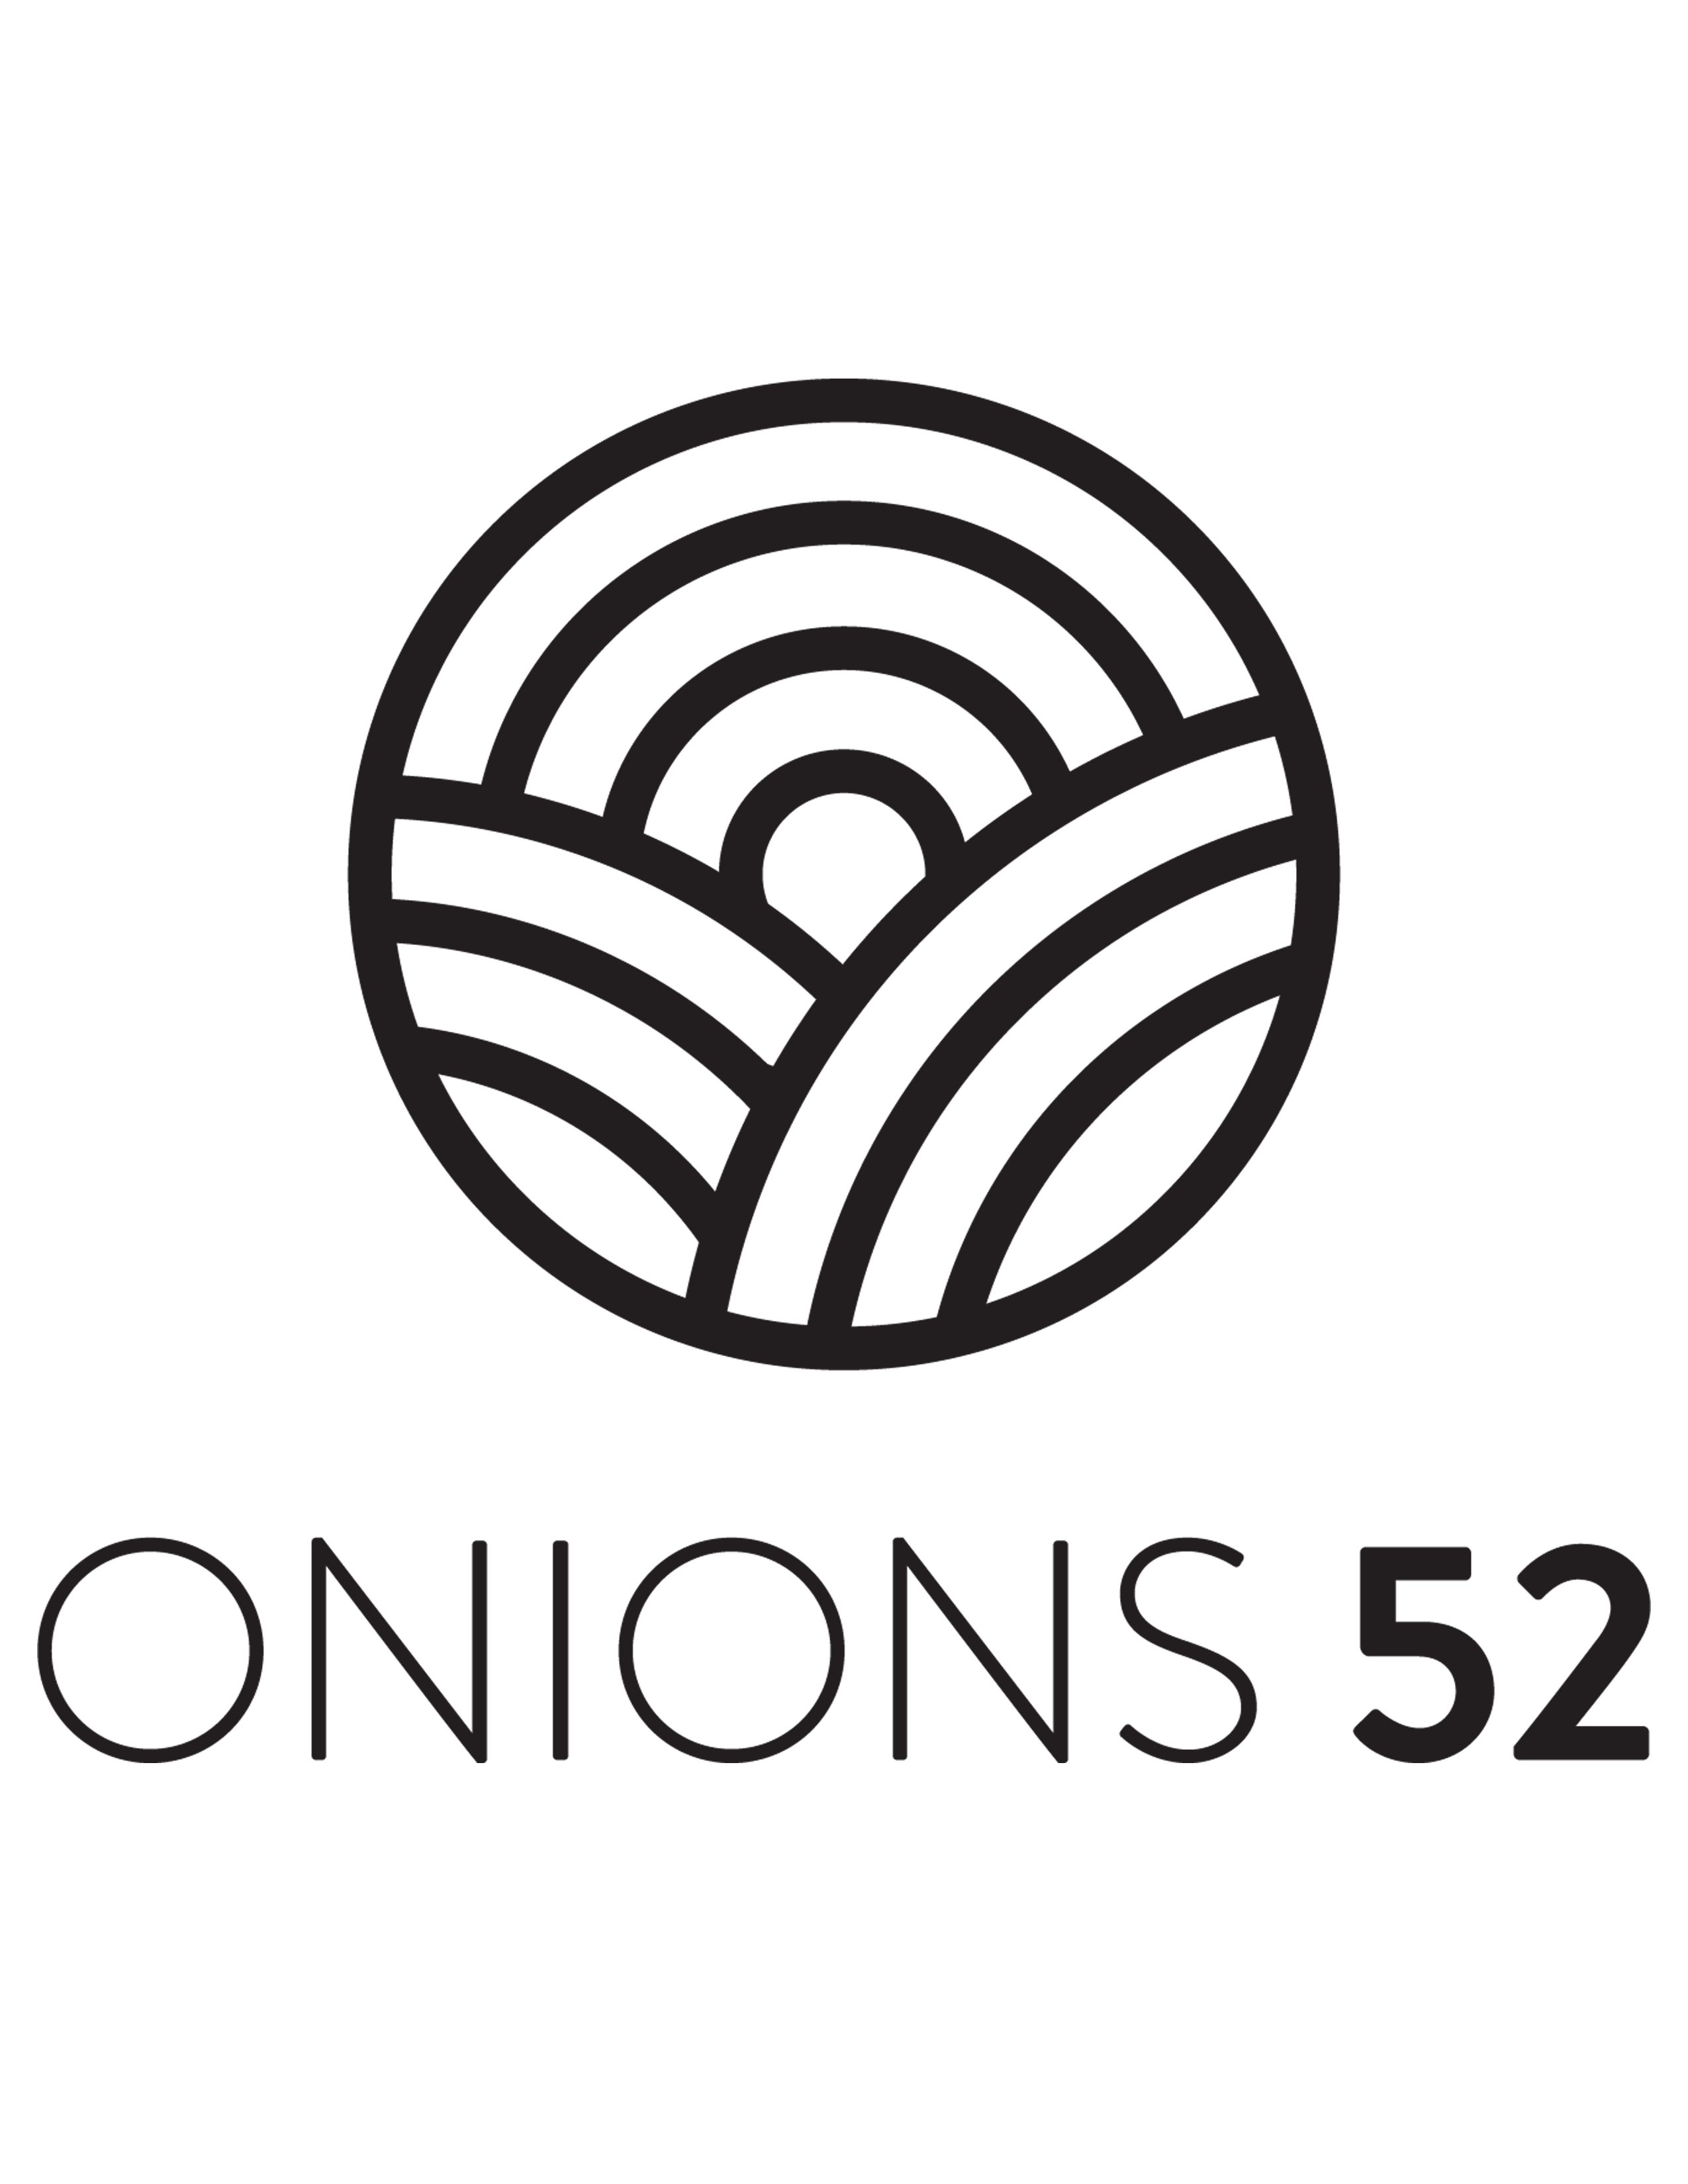 Onions 52 Coloring Page